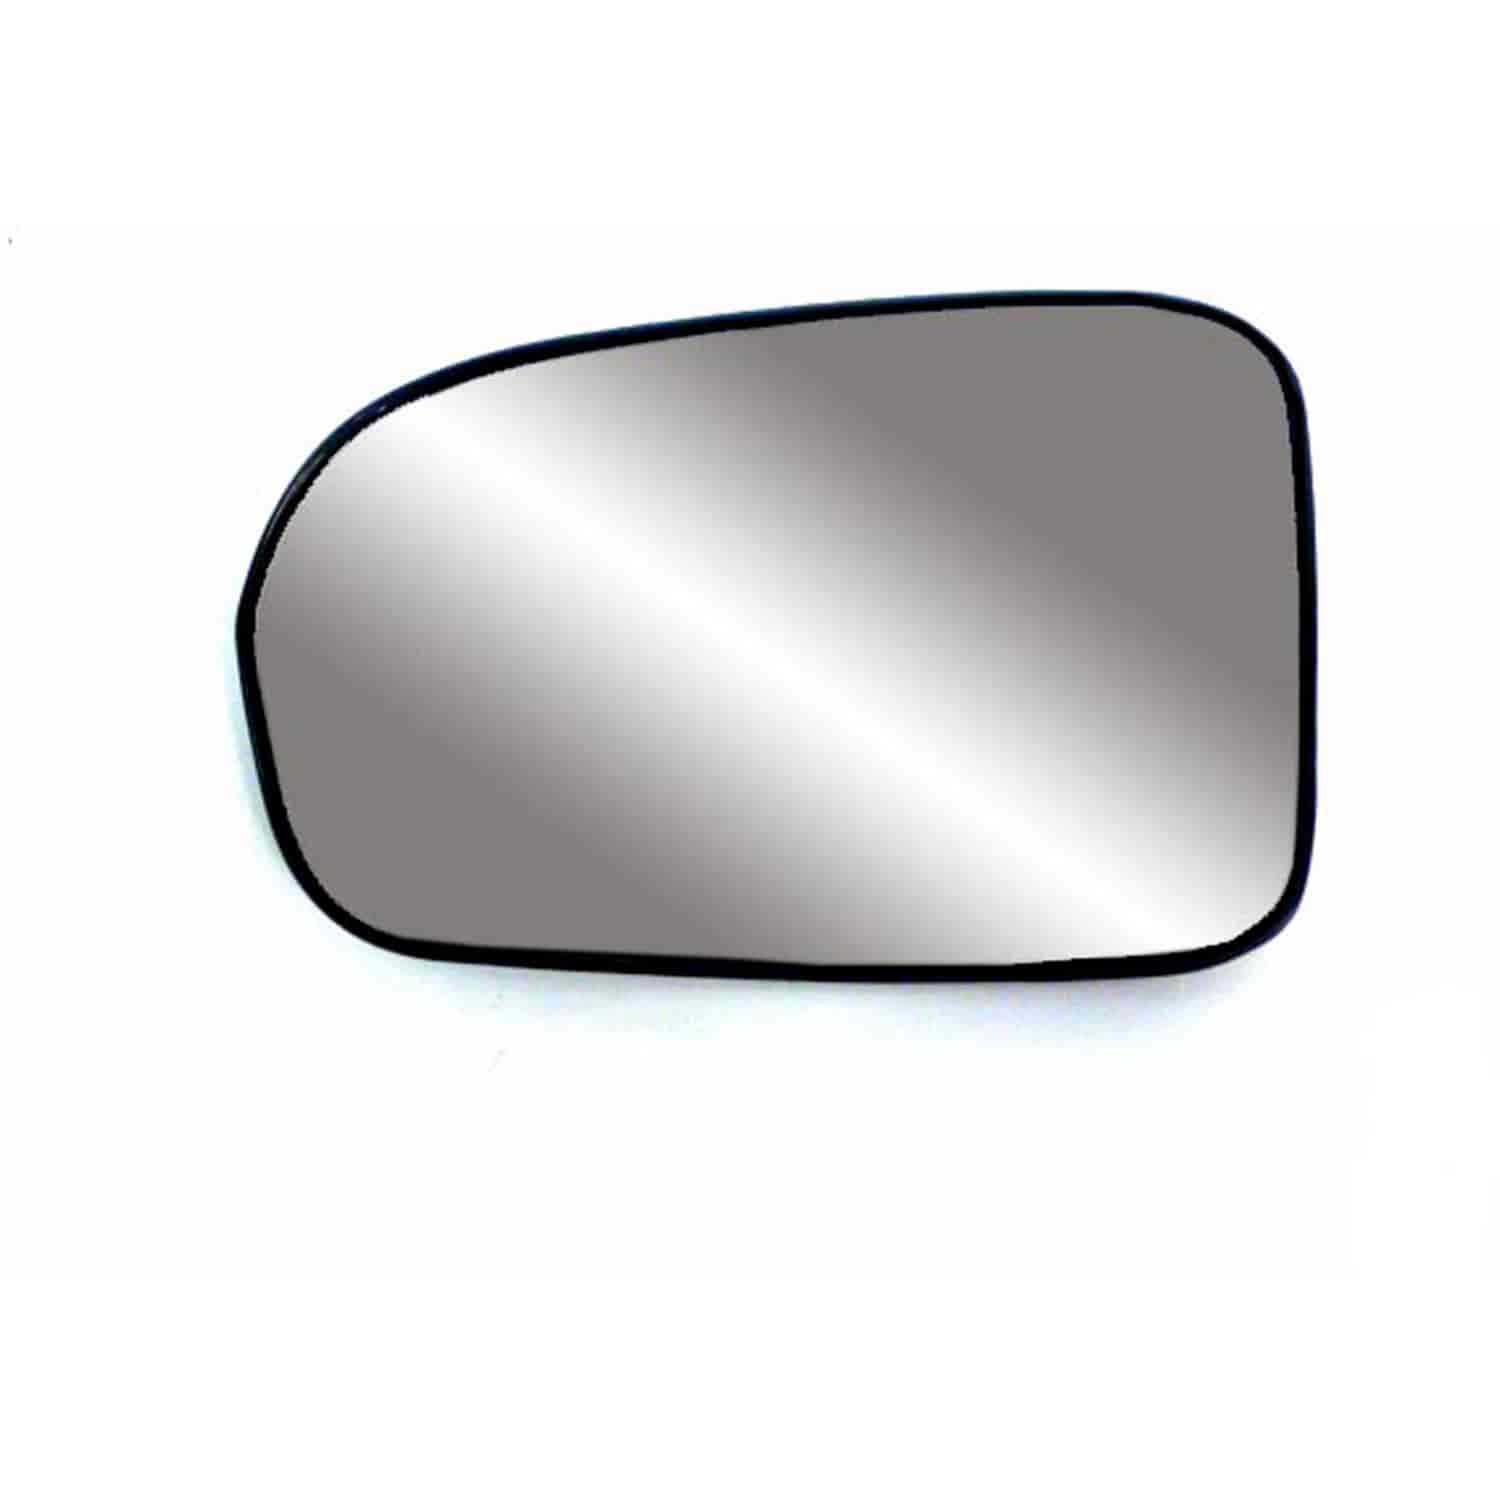 Replacement Glass Assembly for 01-05 Civic replace your cracked or broken driver side mirror glass a